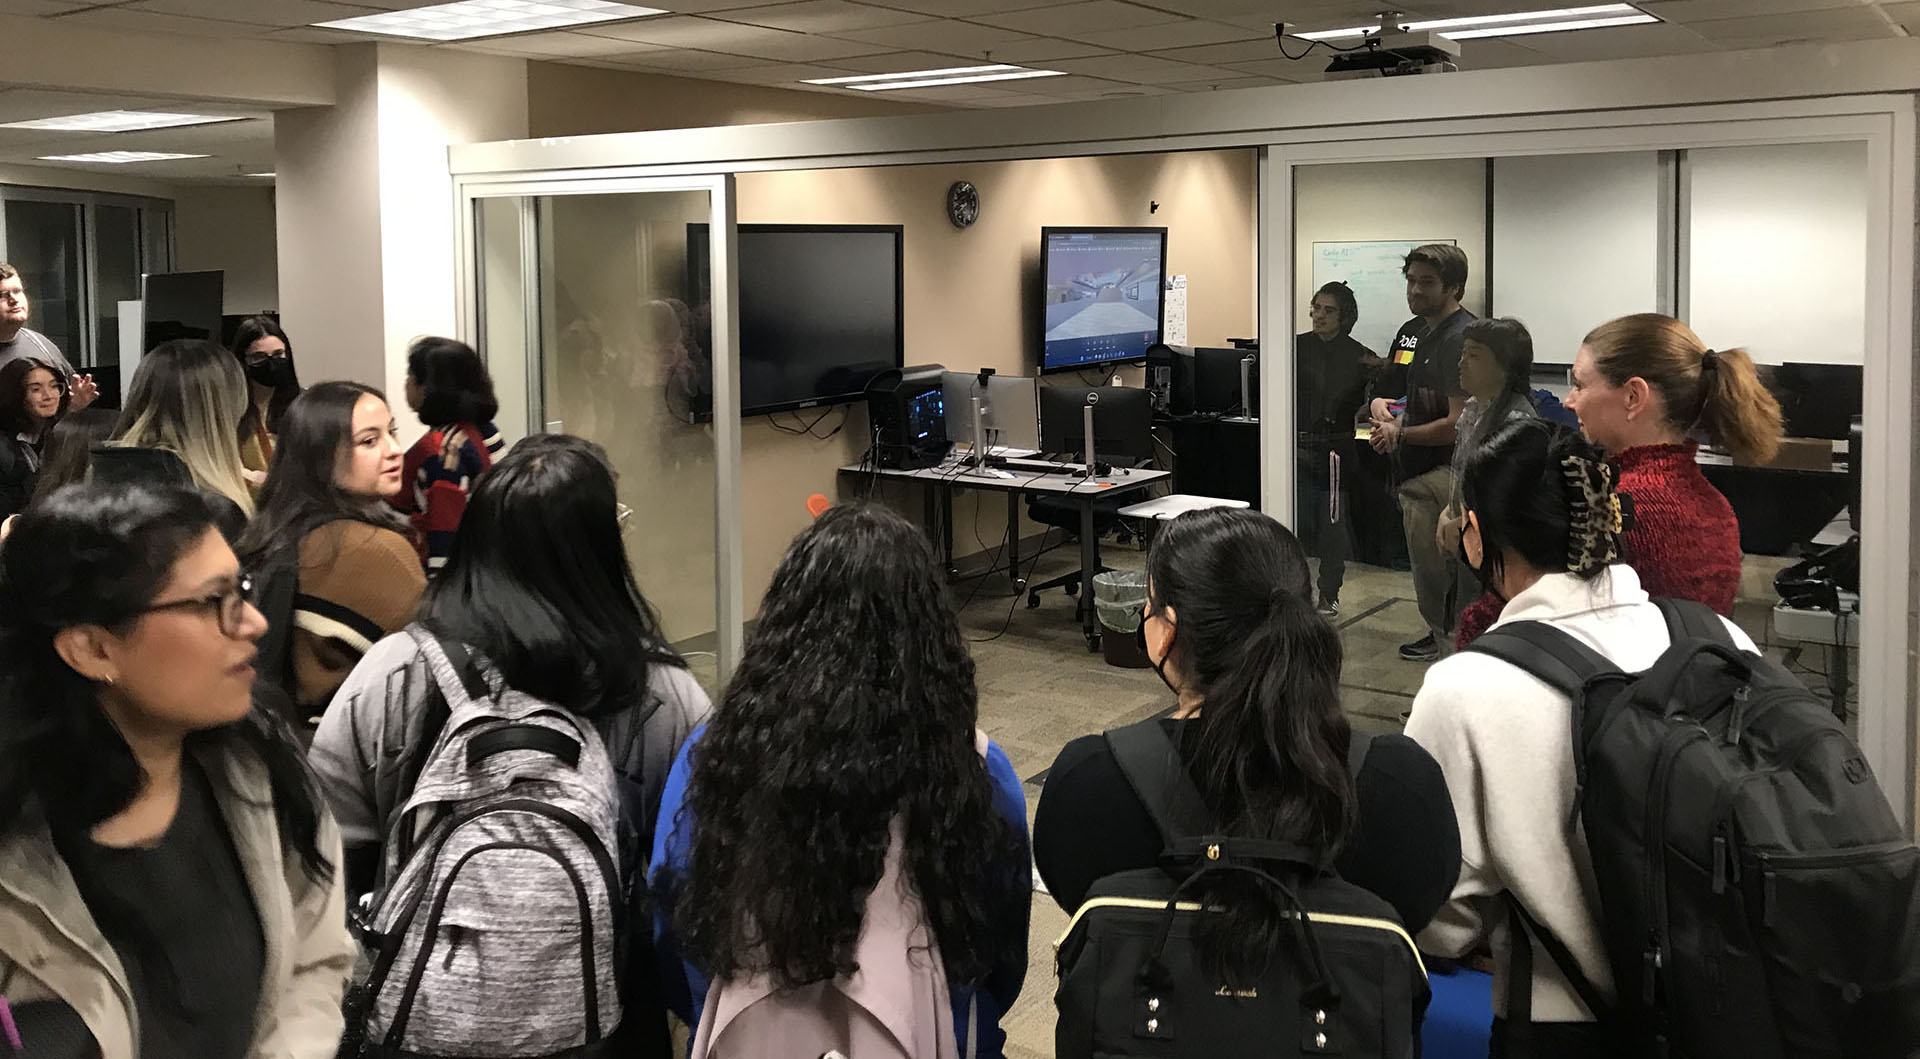 Students studying to become teachers in CSUSB’s James R. Watson and Judy Rodriguez Watson College of Education visit the Extended Reality for Learning (xREAL) Lab. The students learned how to integrate technology such as augmented reality into their classroom planning.